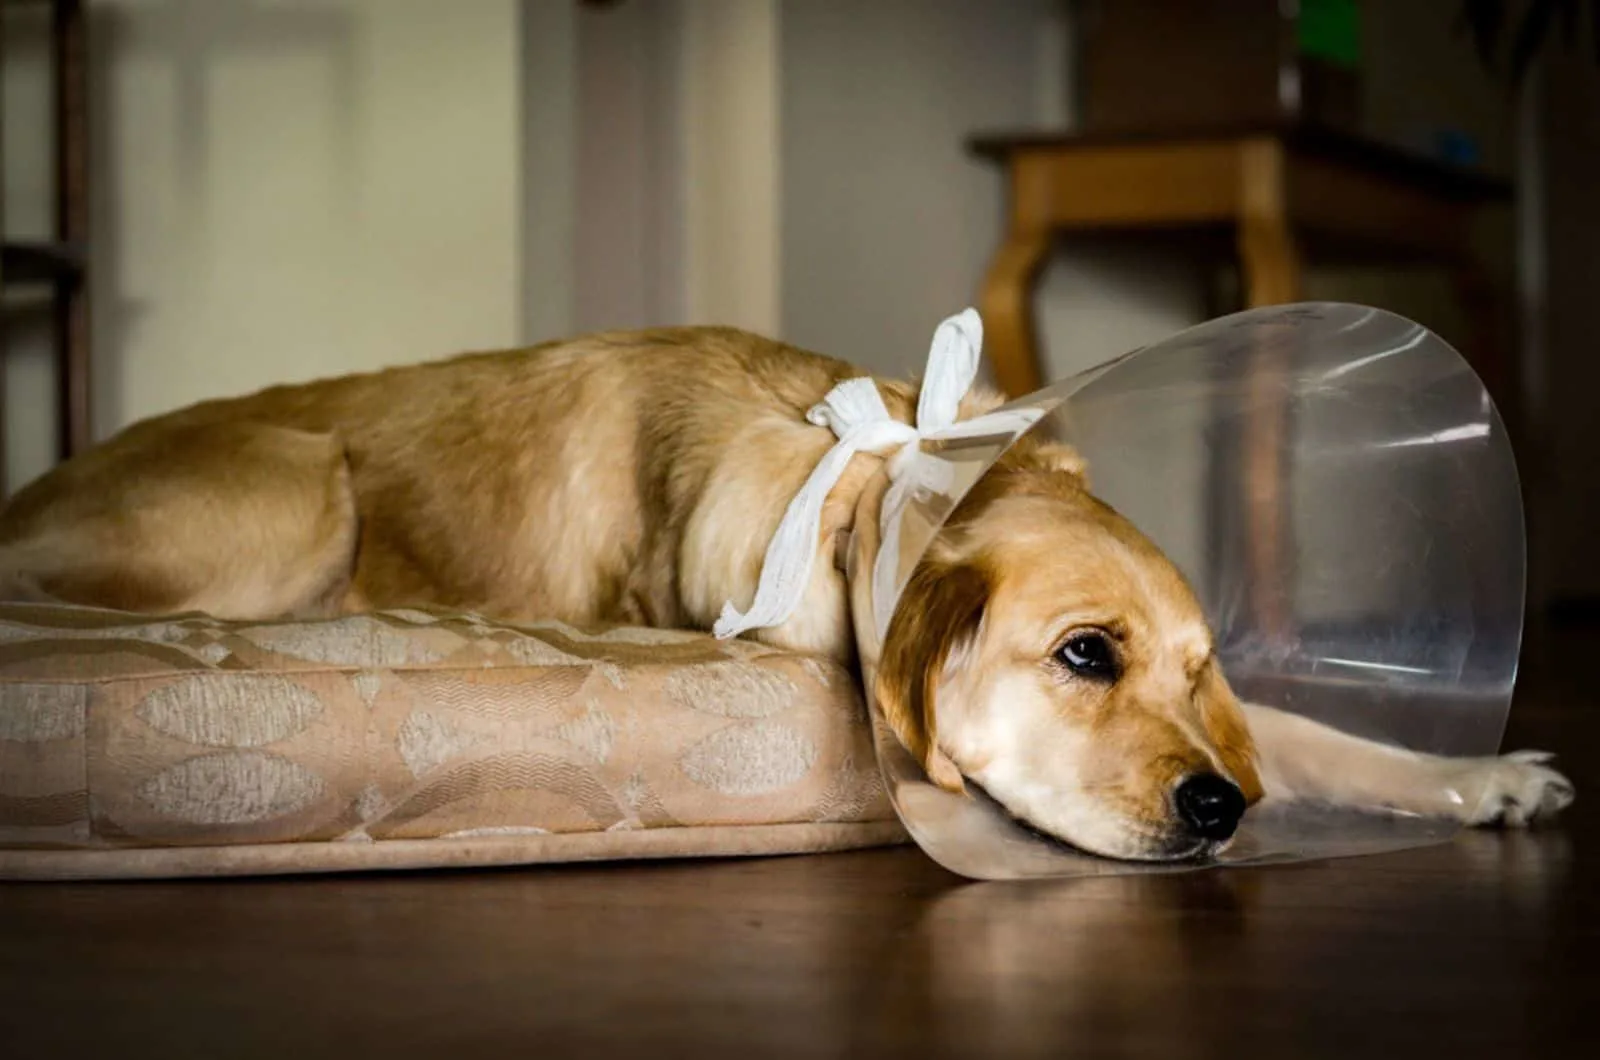 Puppy looking sad while wearing a cone of shame